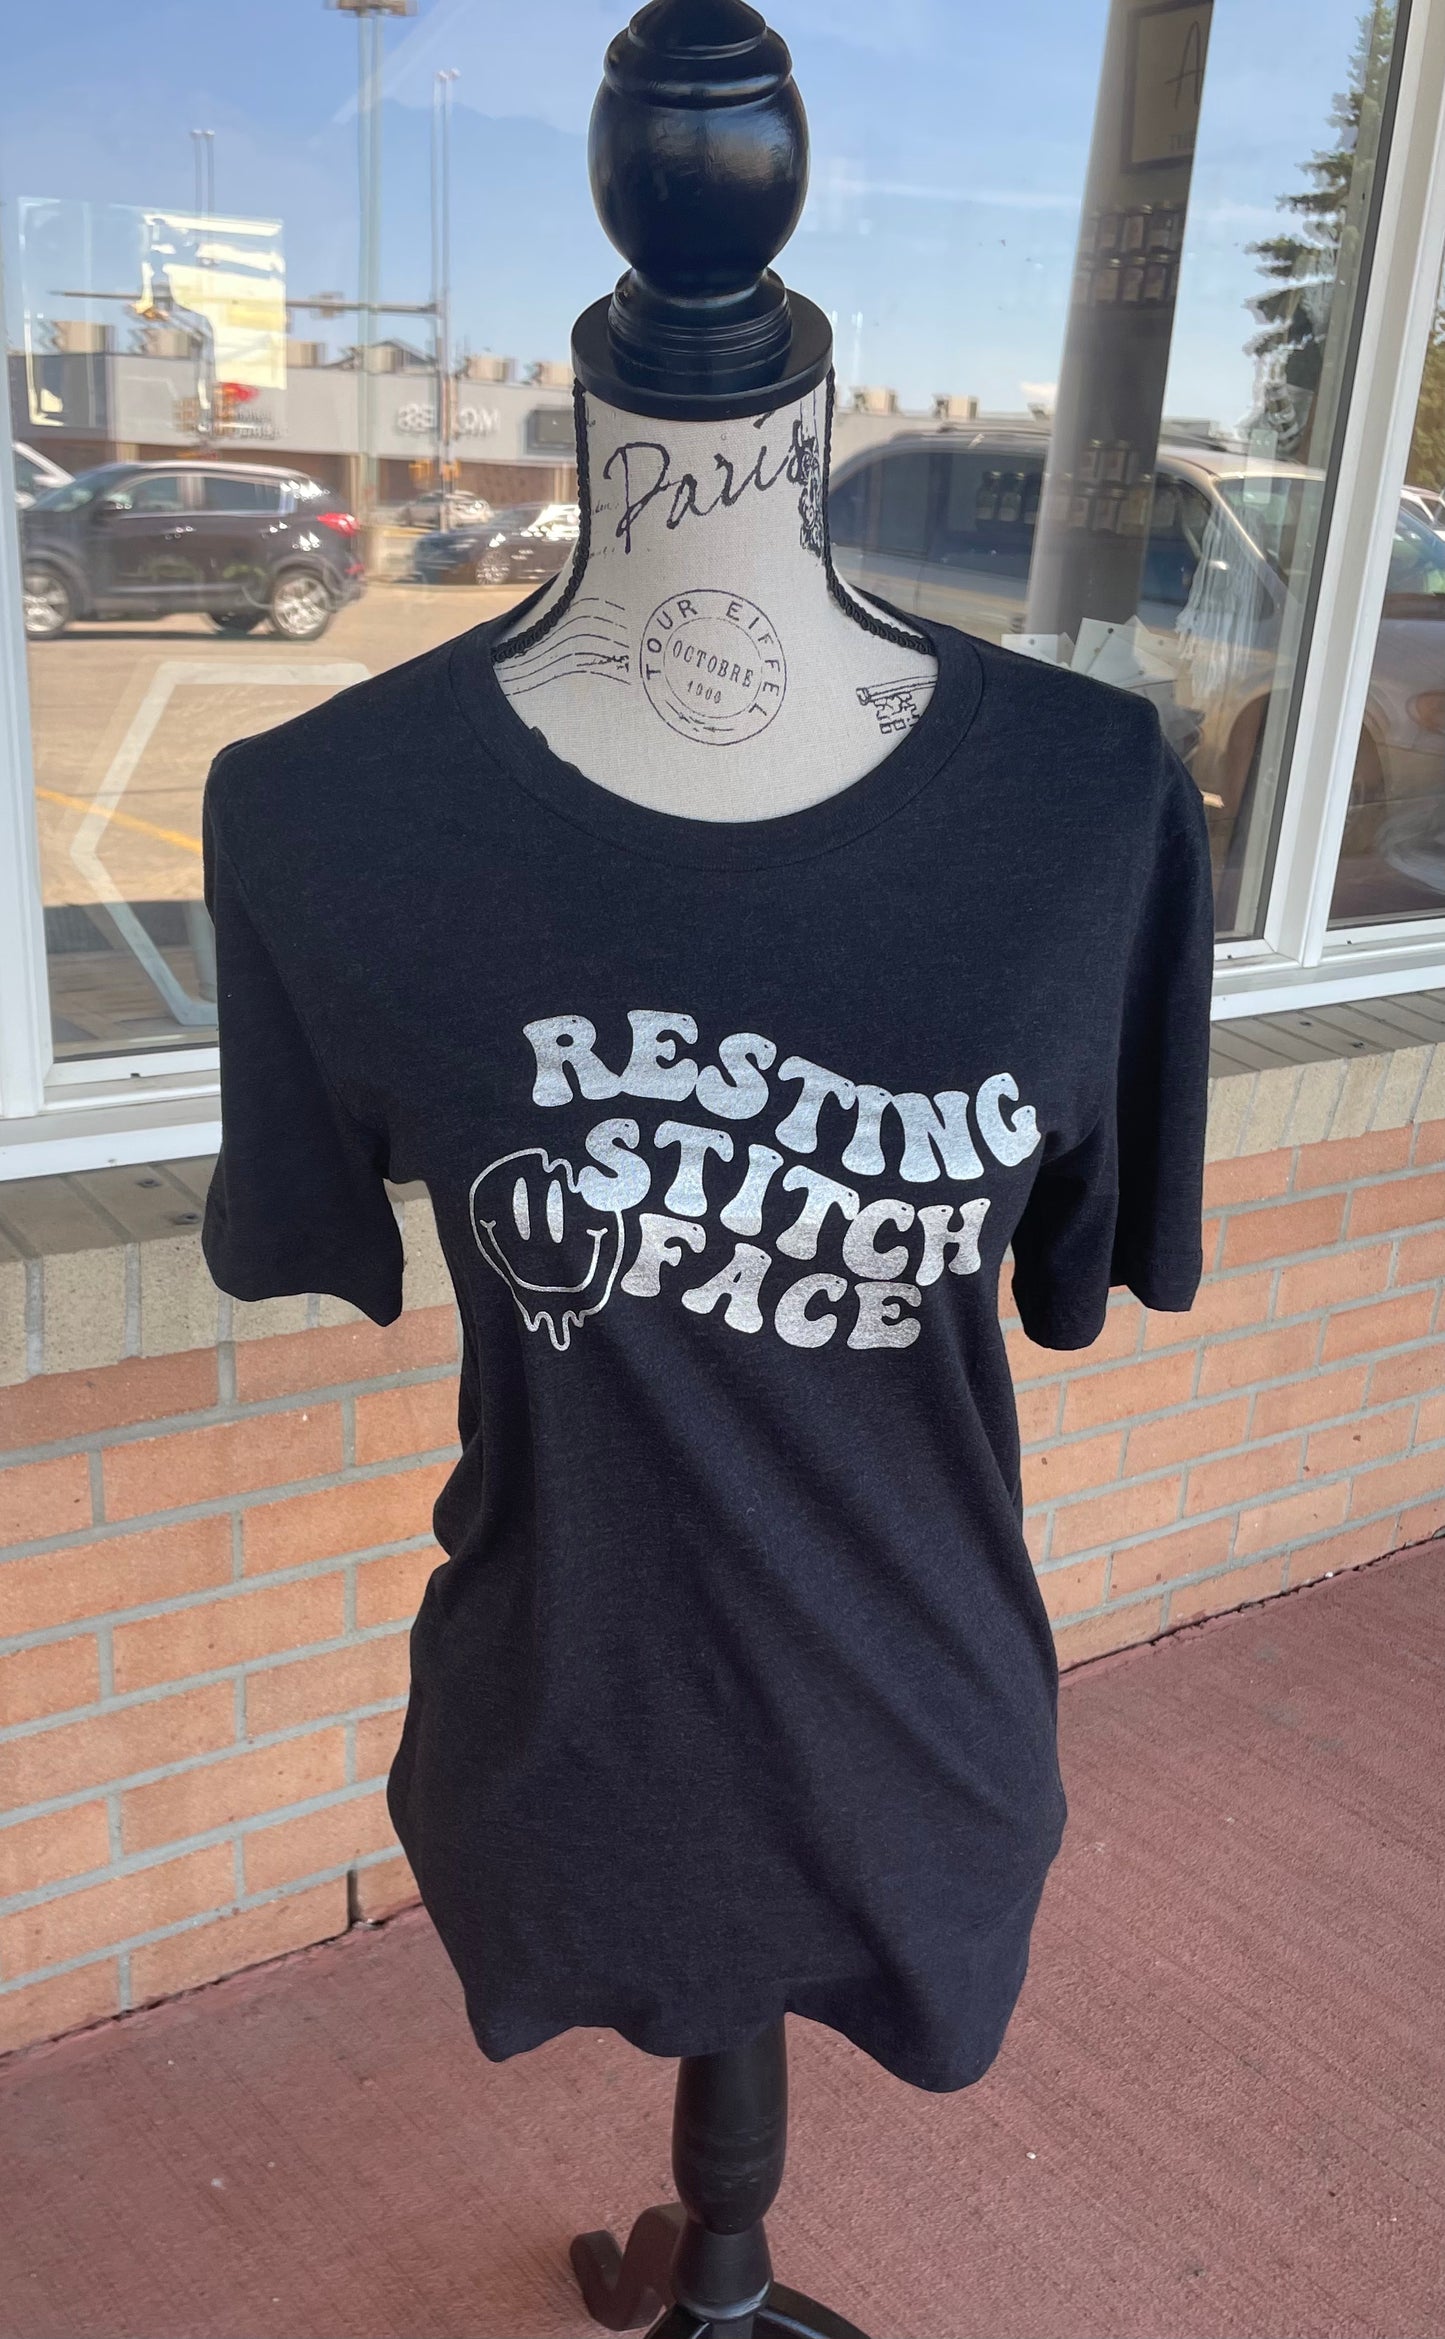 Resting Stitch Face tee